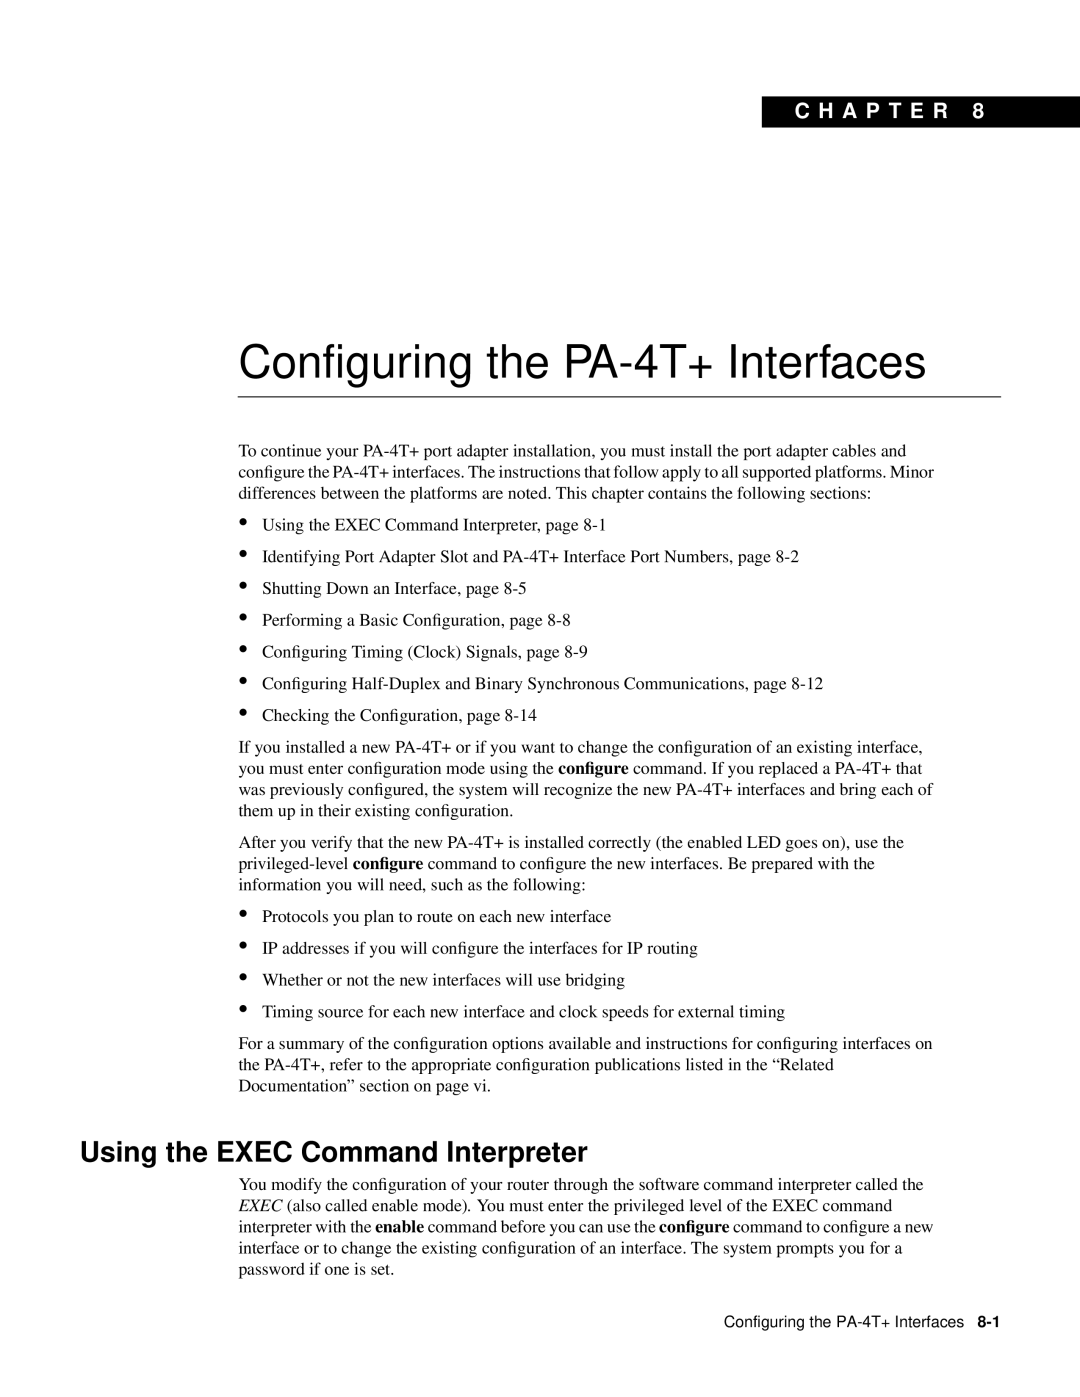 Cisco Systems manual Configuring the PA-4T+ Interfaces, Using the EXEC Command Interpreter, C H A P T E R 